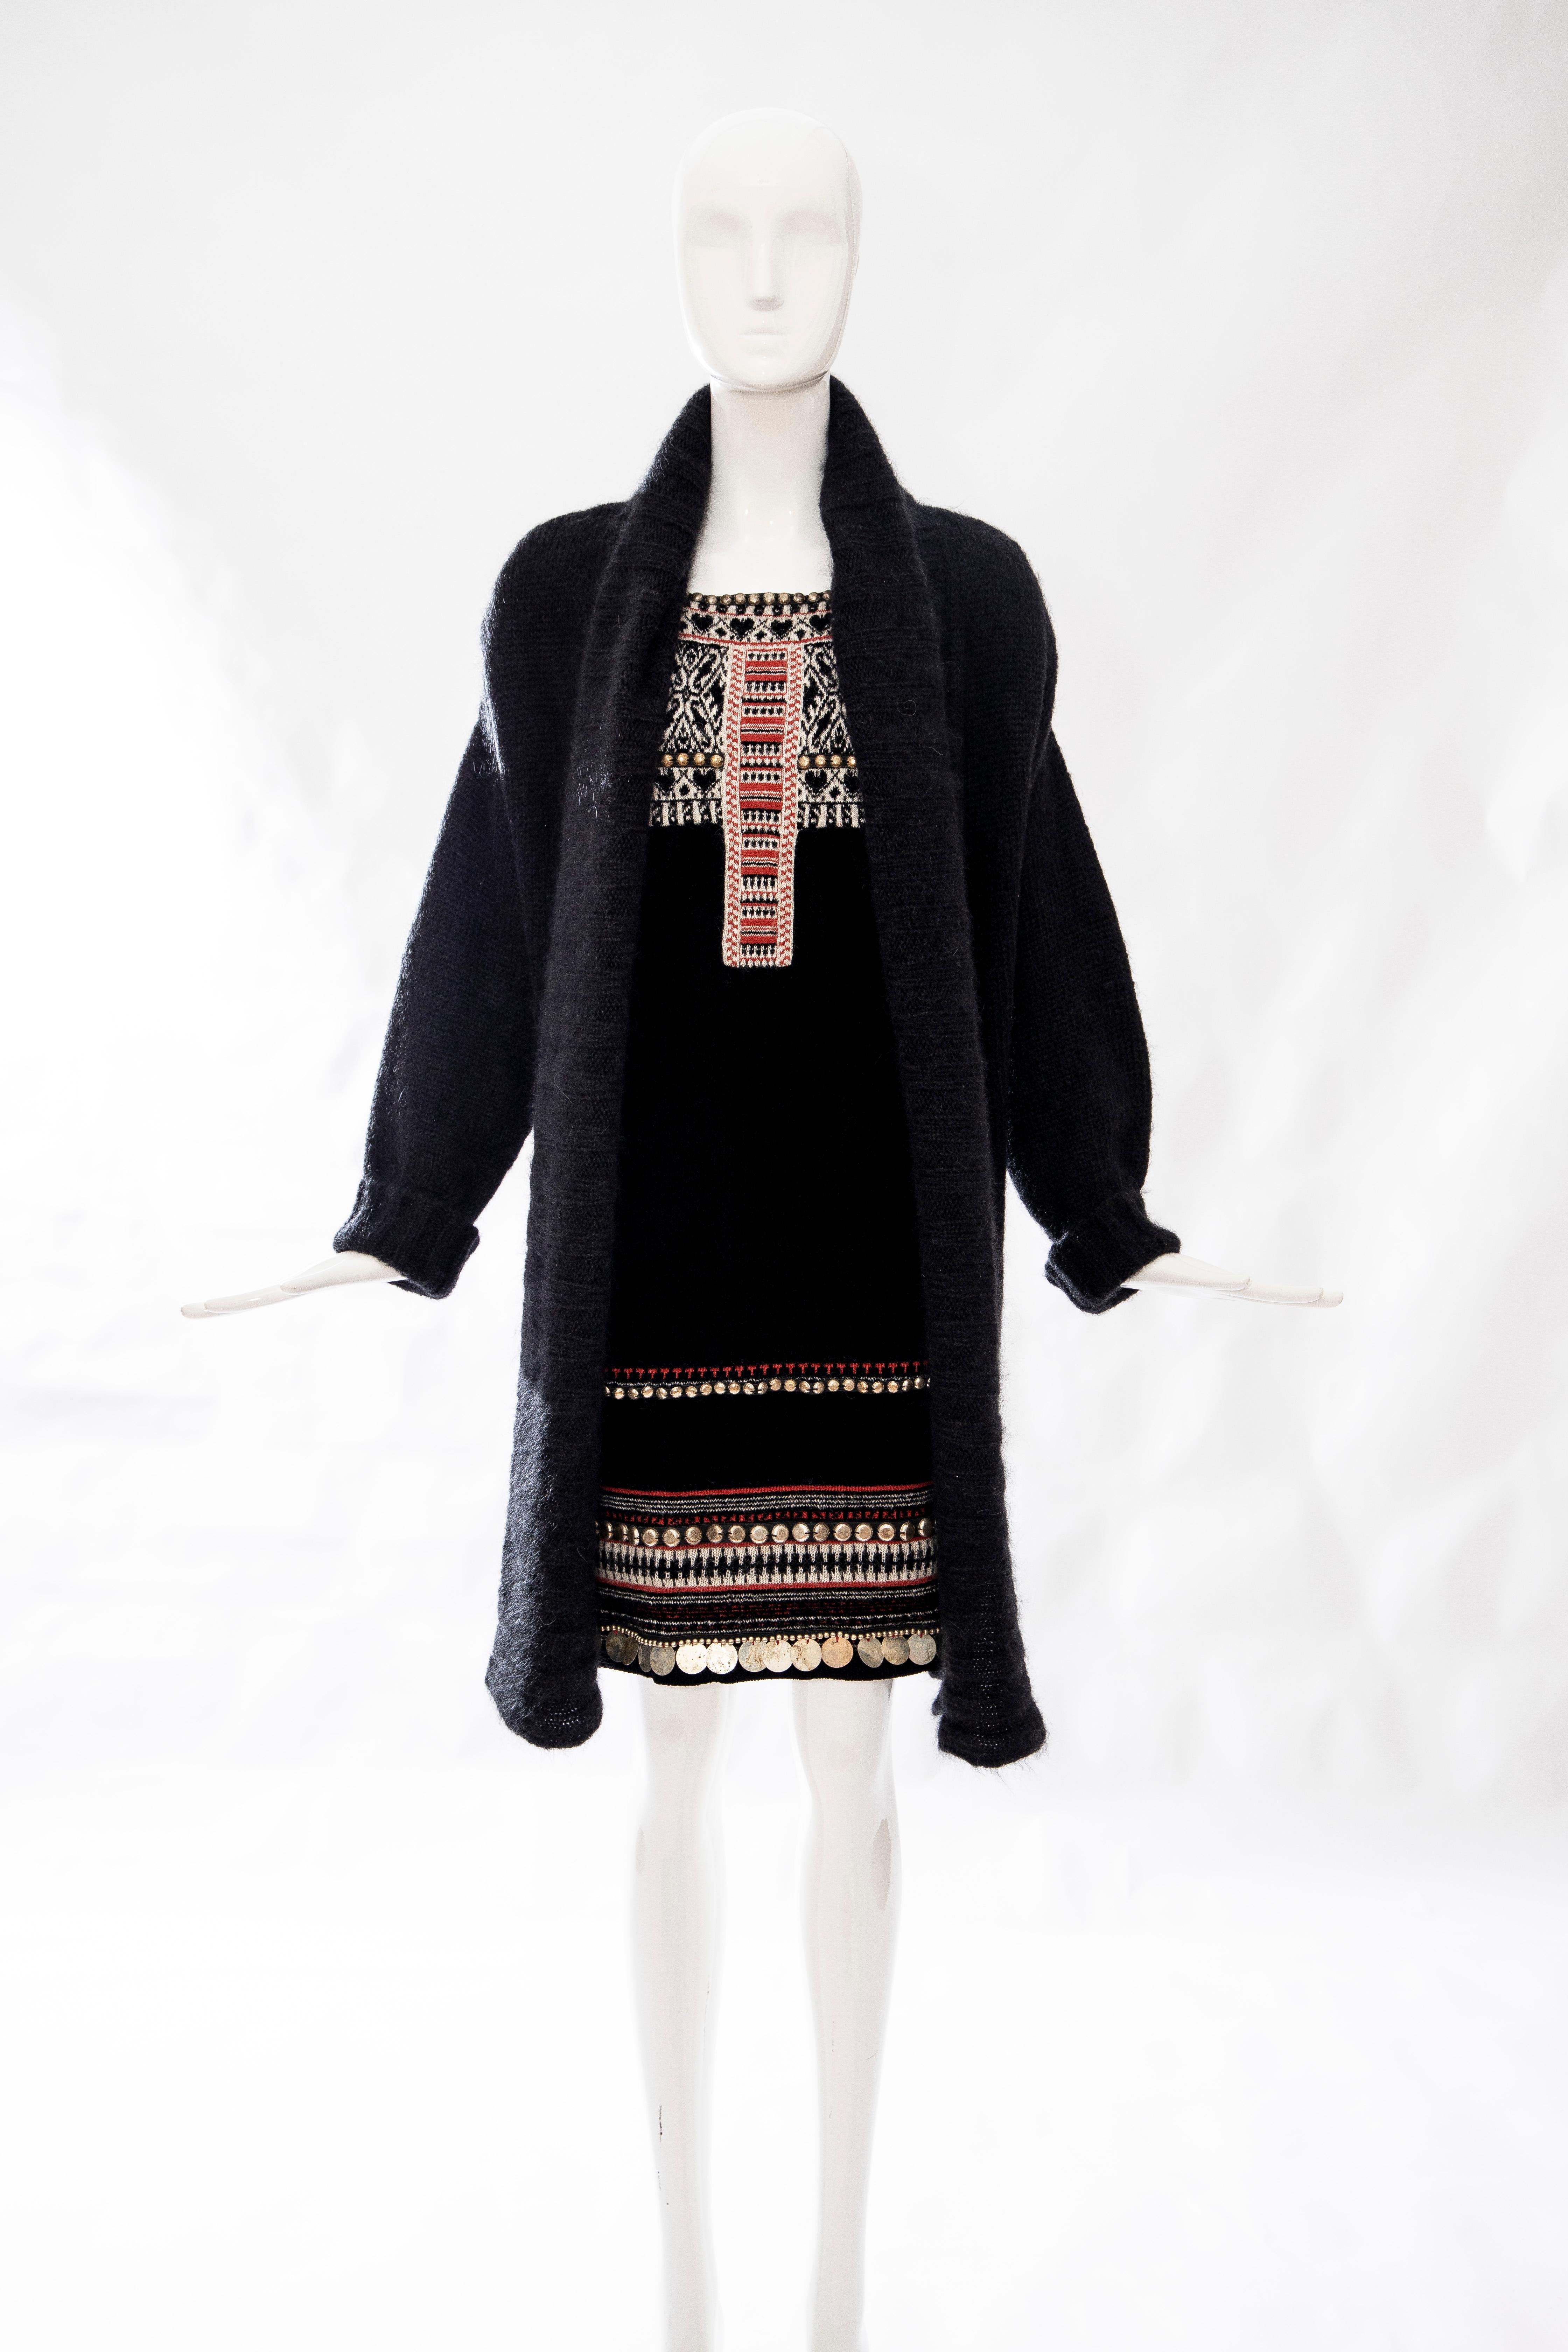 Jean Paul Gaultier Runway Mohair Knit Appliquéd Coins Sweater Dress , Fall 2010 In Excellent Condition For Sale In Cincinnati, OH